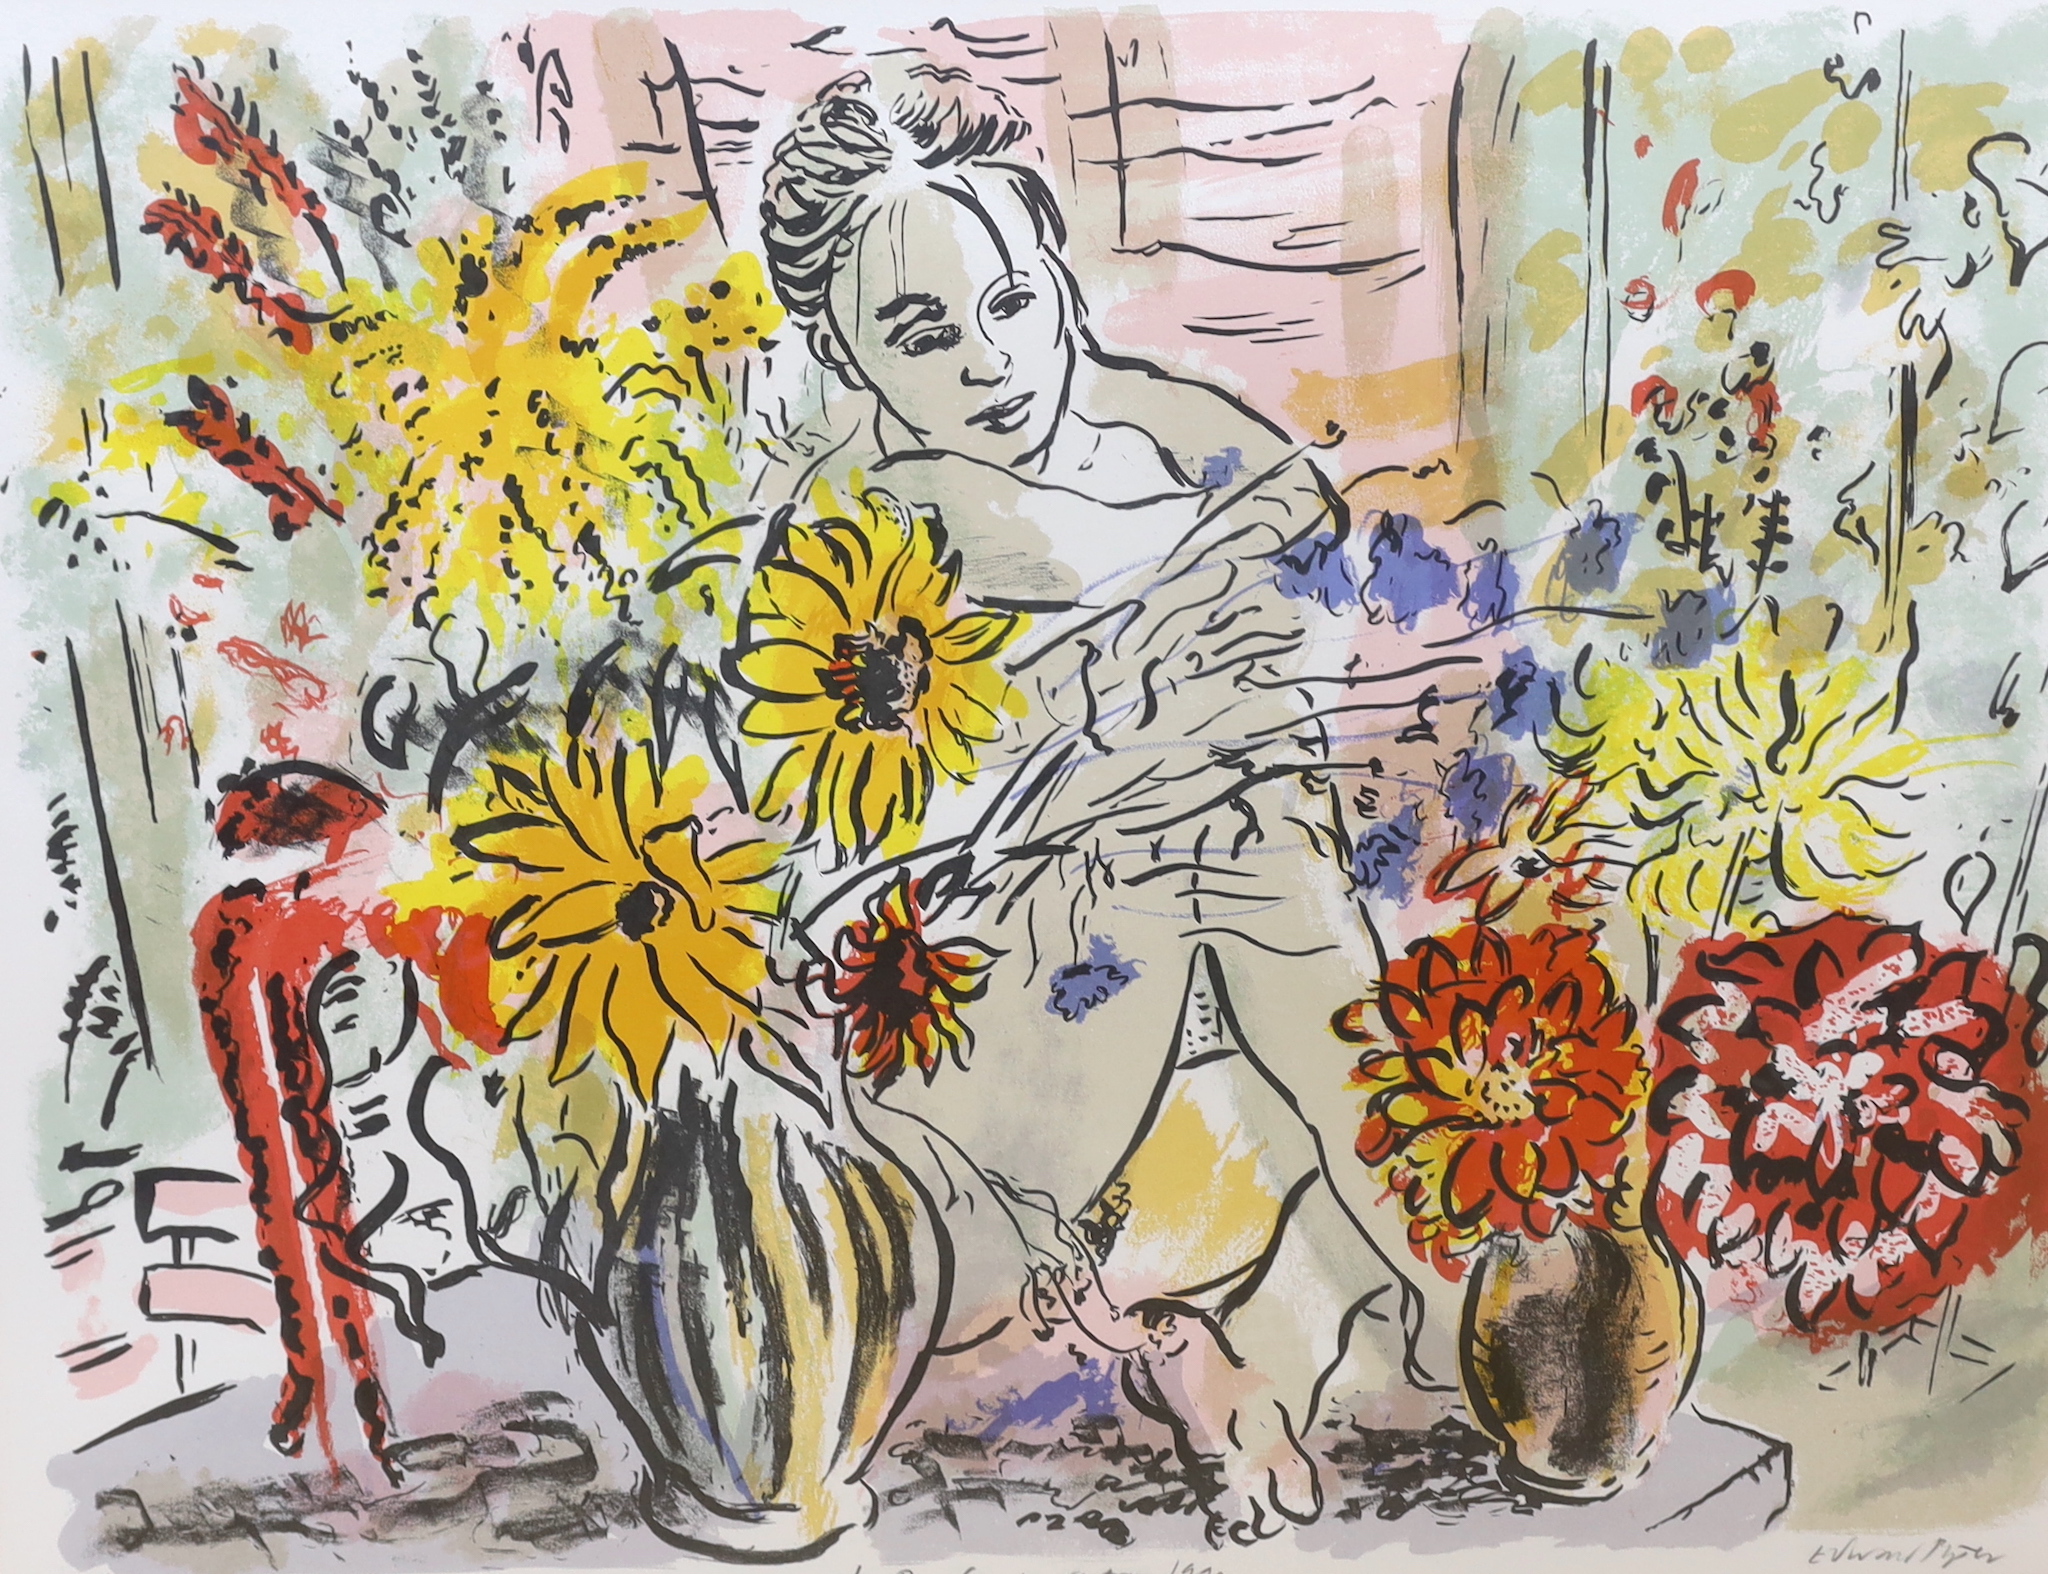 Edward Piper (1938-1990), pair of pencil signed colour lithographs, ‘In the Conservatory’ and ‘Afternoon in Tuscany’, limited edition 131/175 & 101/175, 48 x 62cm